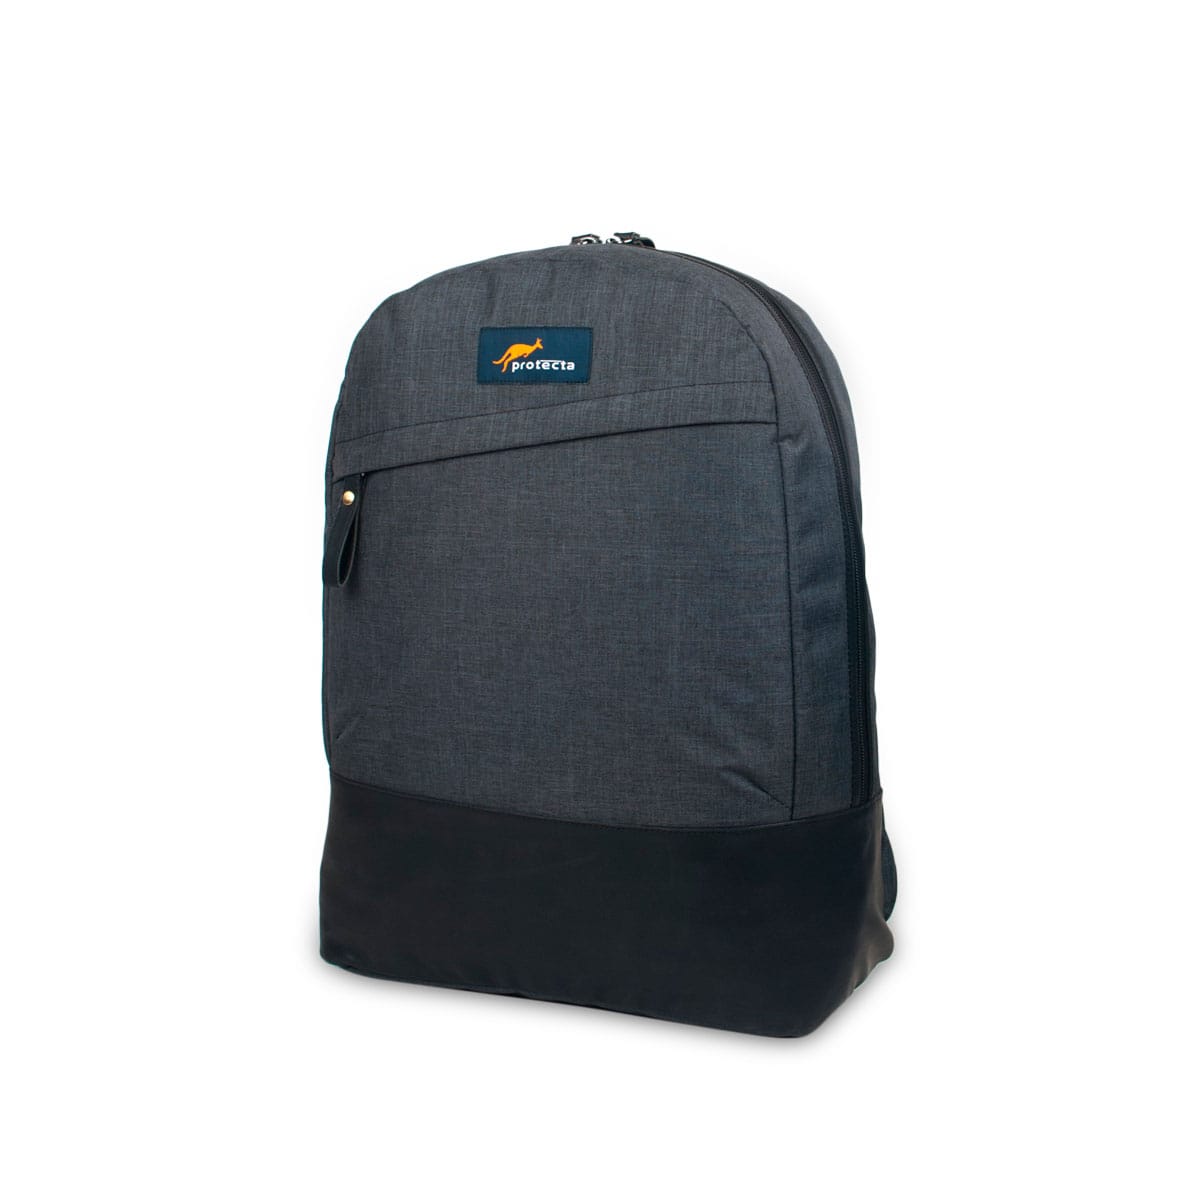 Black-Abbey Grey, Protecta Private Access Casual Backpack-2